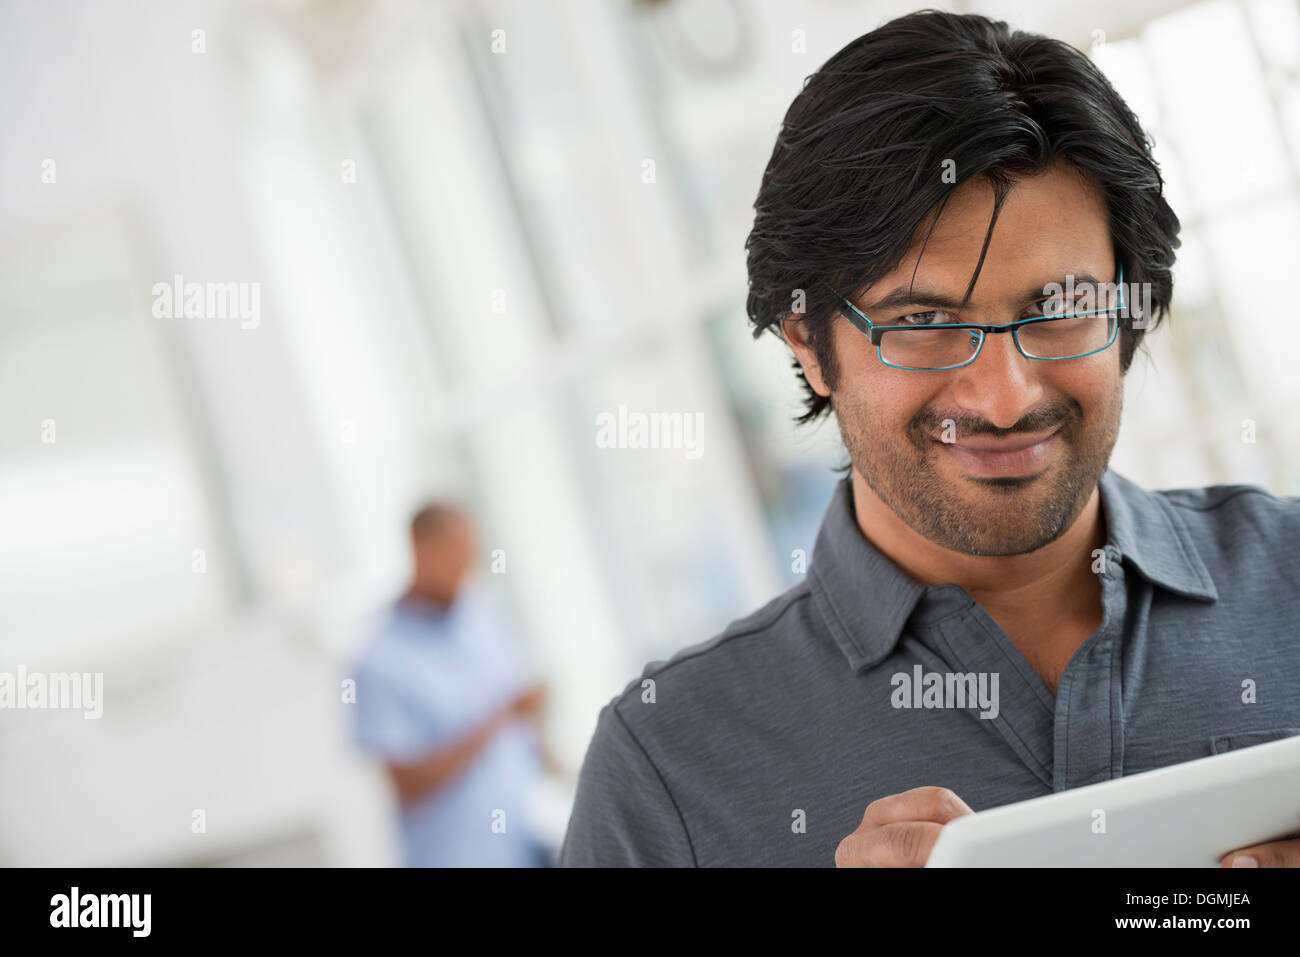 Business people. A man using a digital tablet. Stock Photo